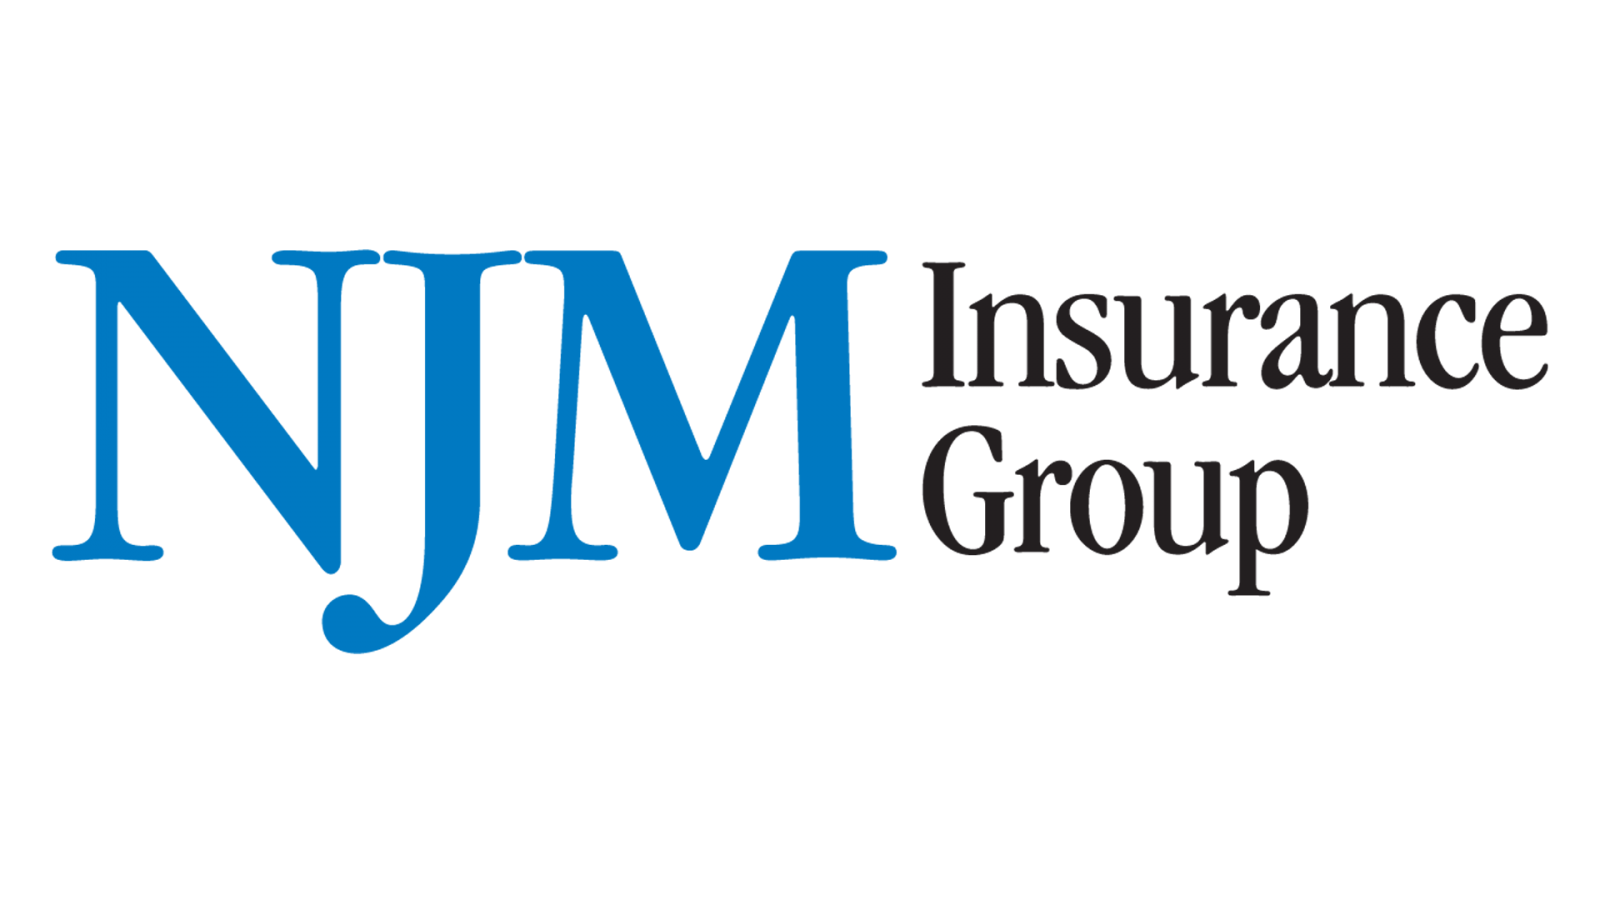 New Jersey Manufacturer Insurance Group